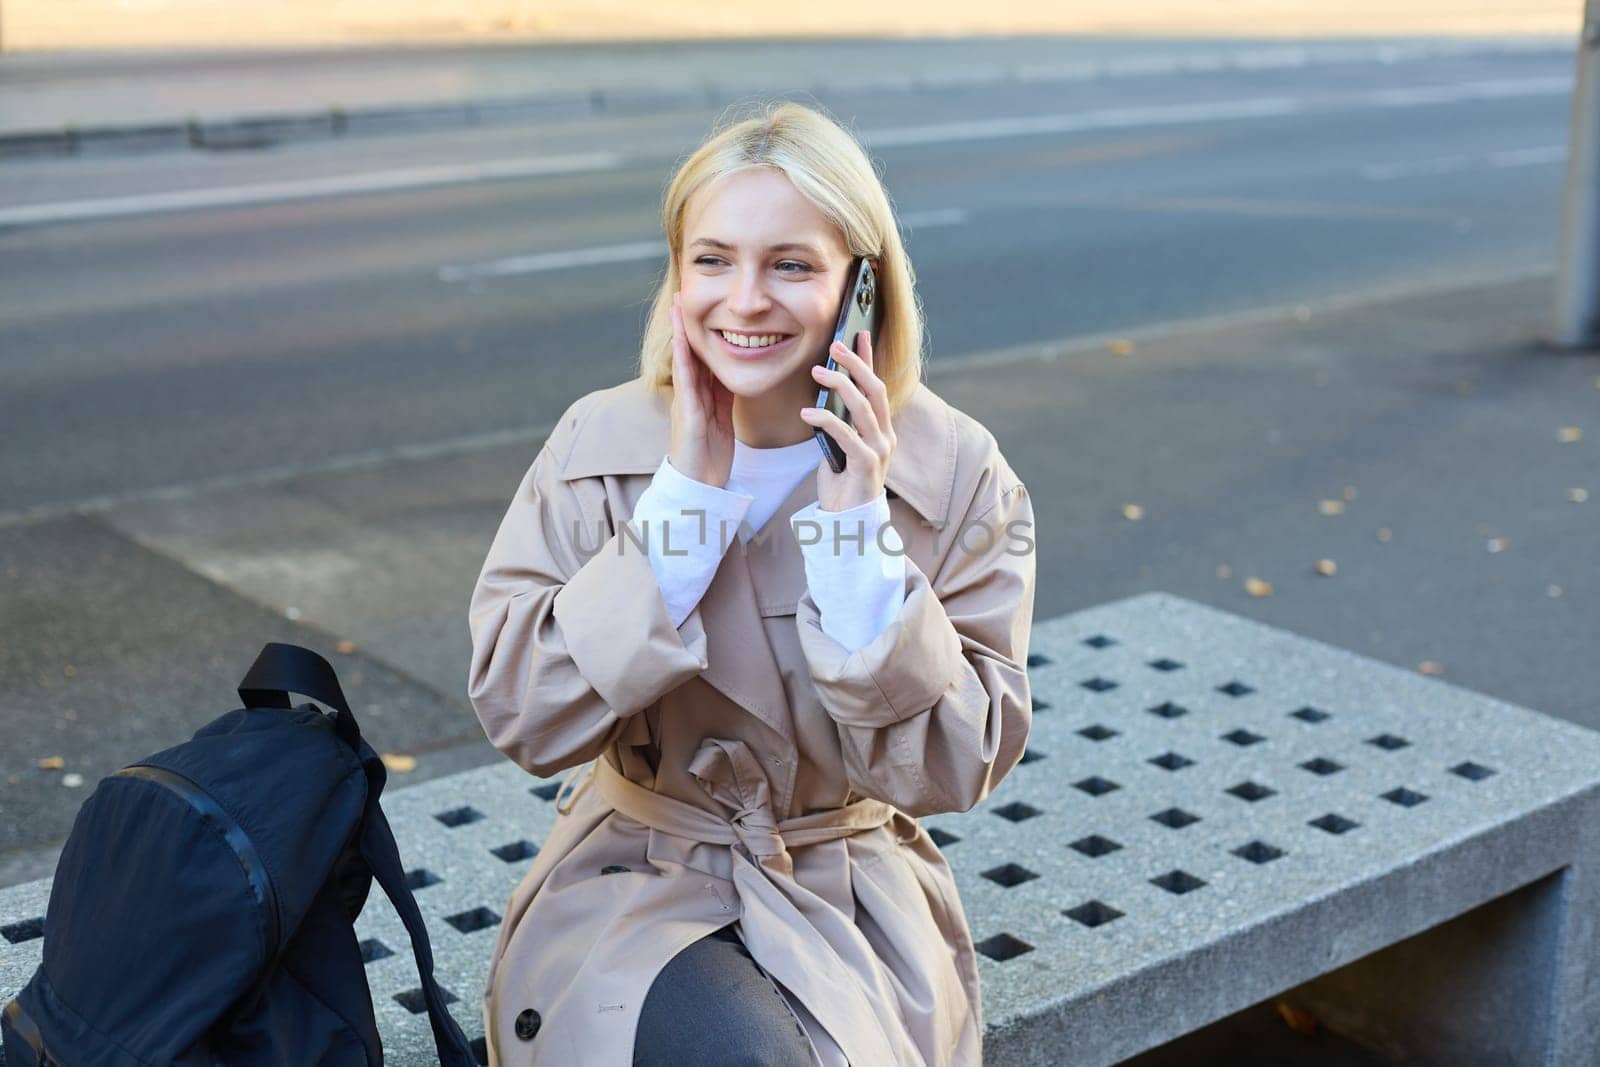 Image of young blond woman sitting on street bench with backpack, talking on mobile phone, answers a call and smiling while chatting with someone.